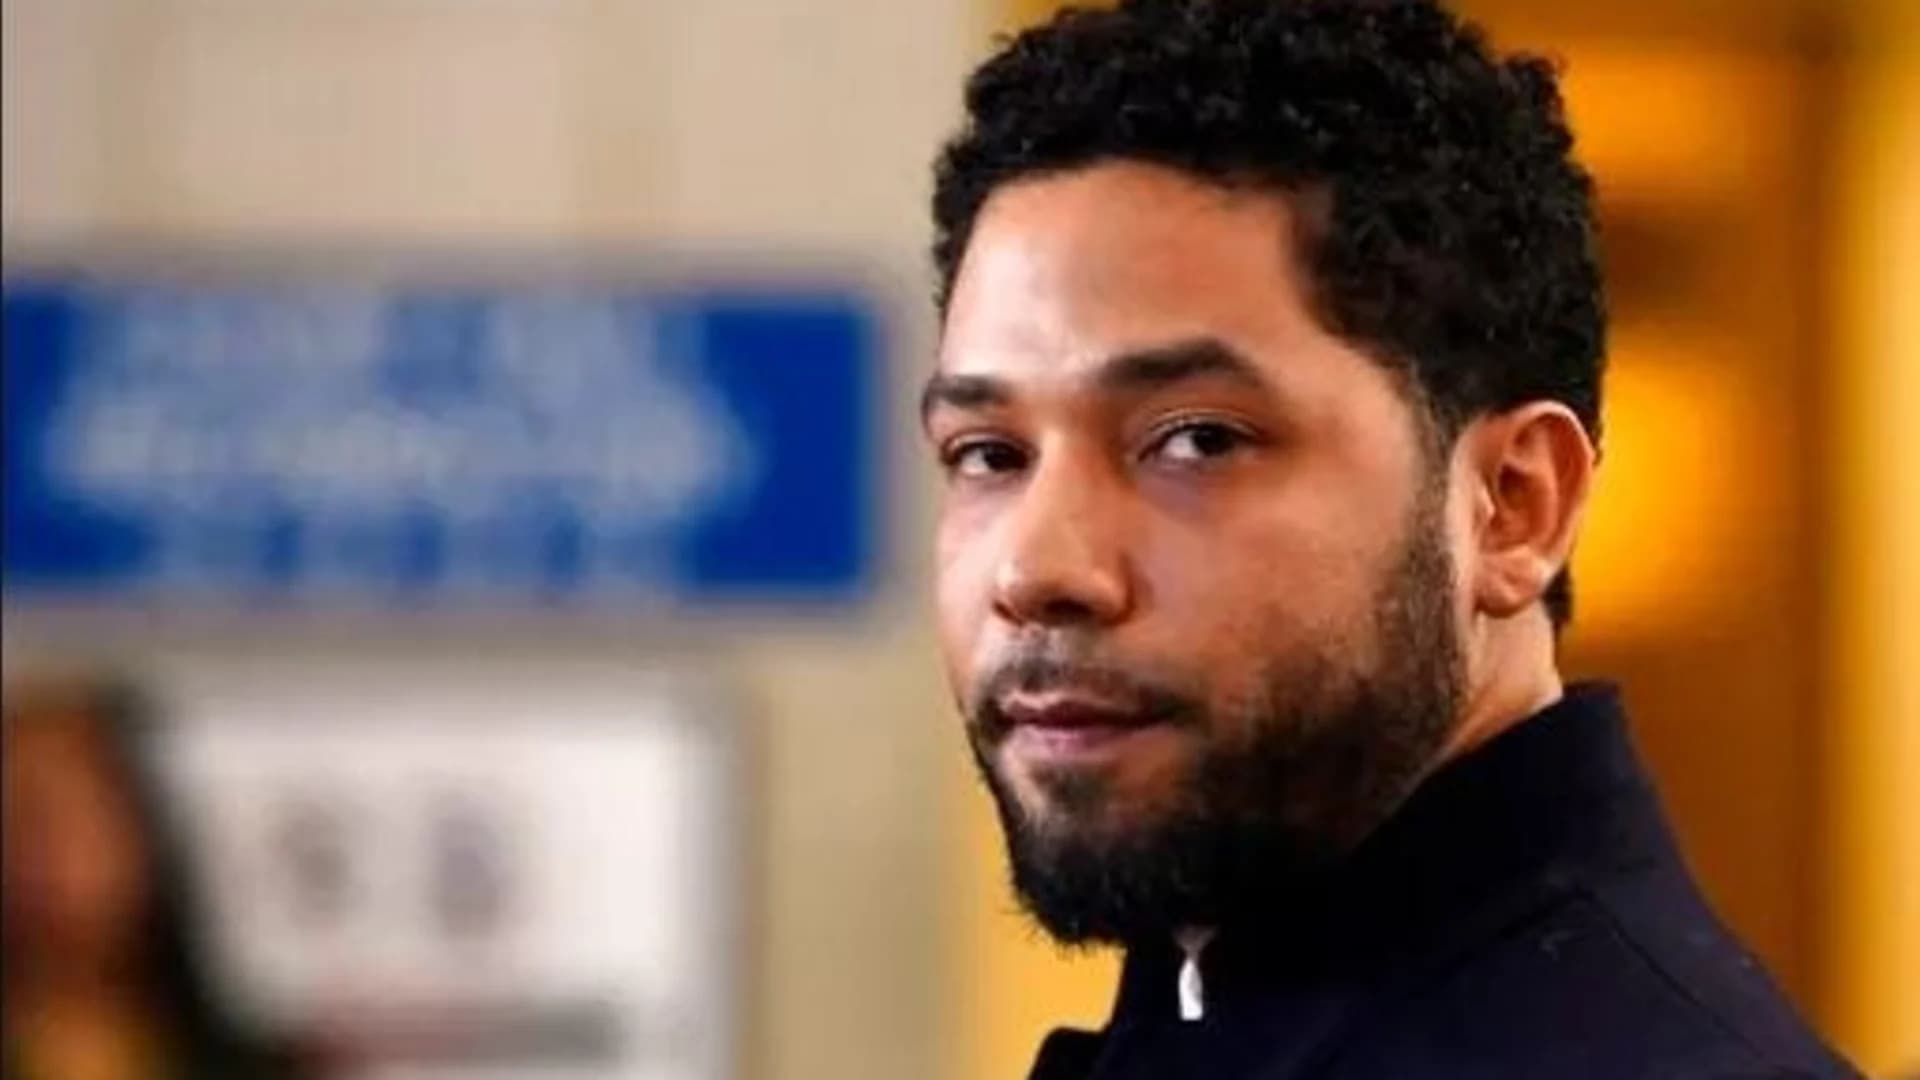 Actor Jussie Smollett pleads not guilty to restored charges